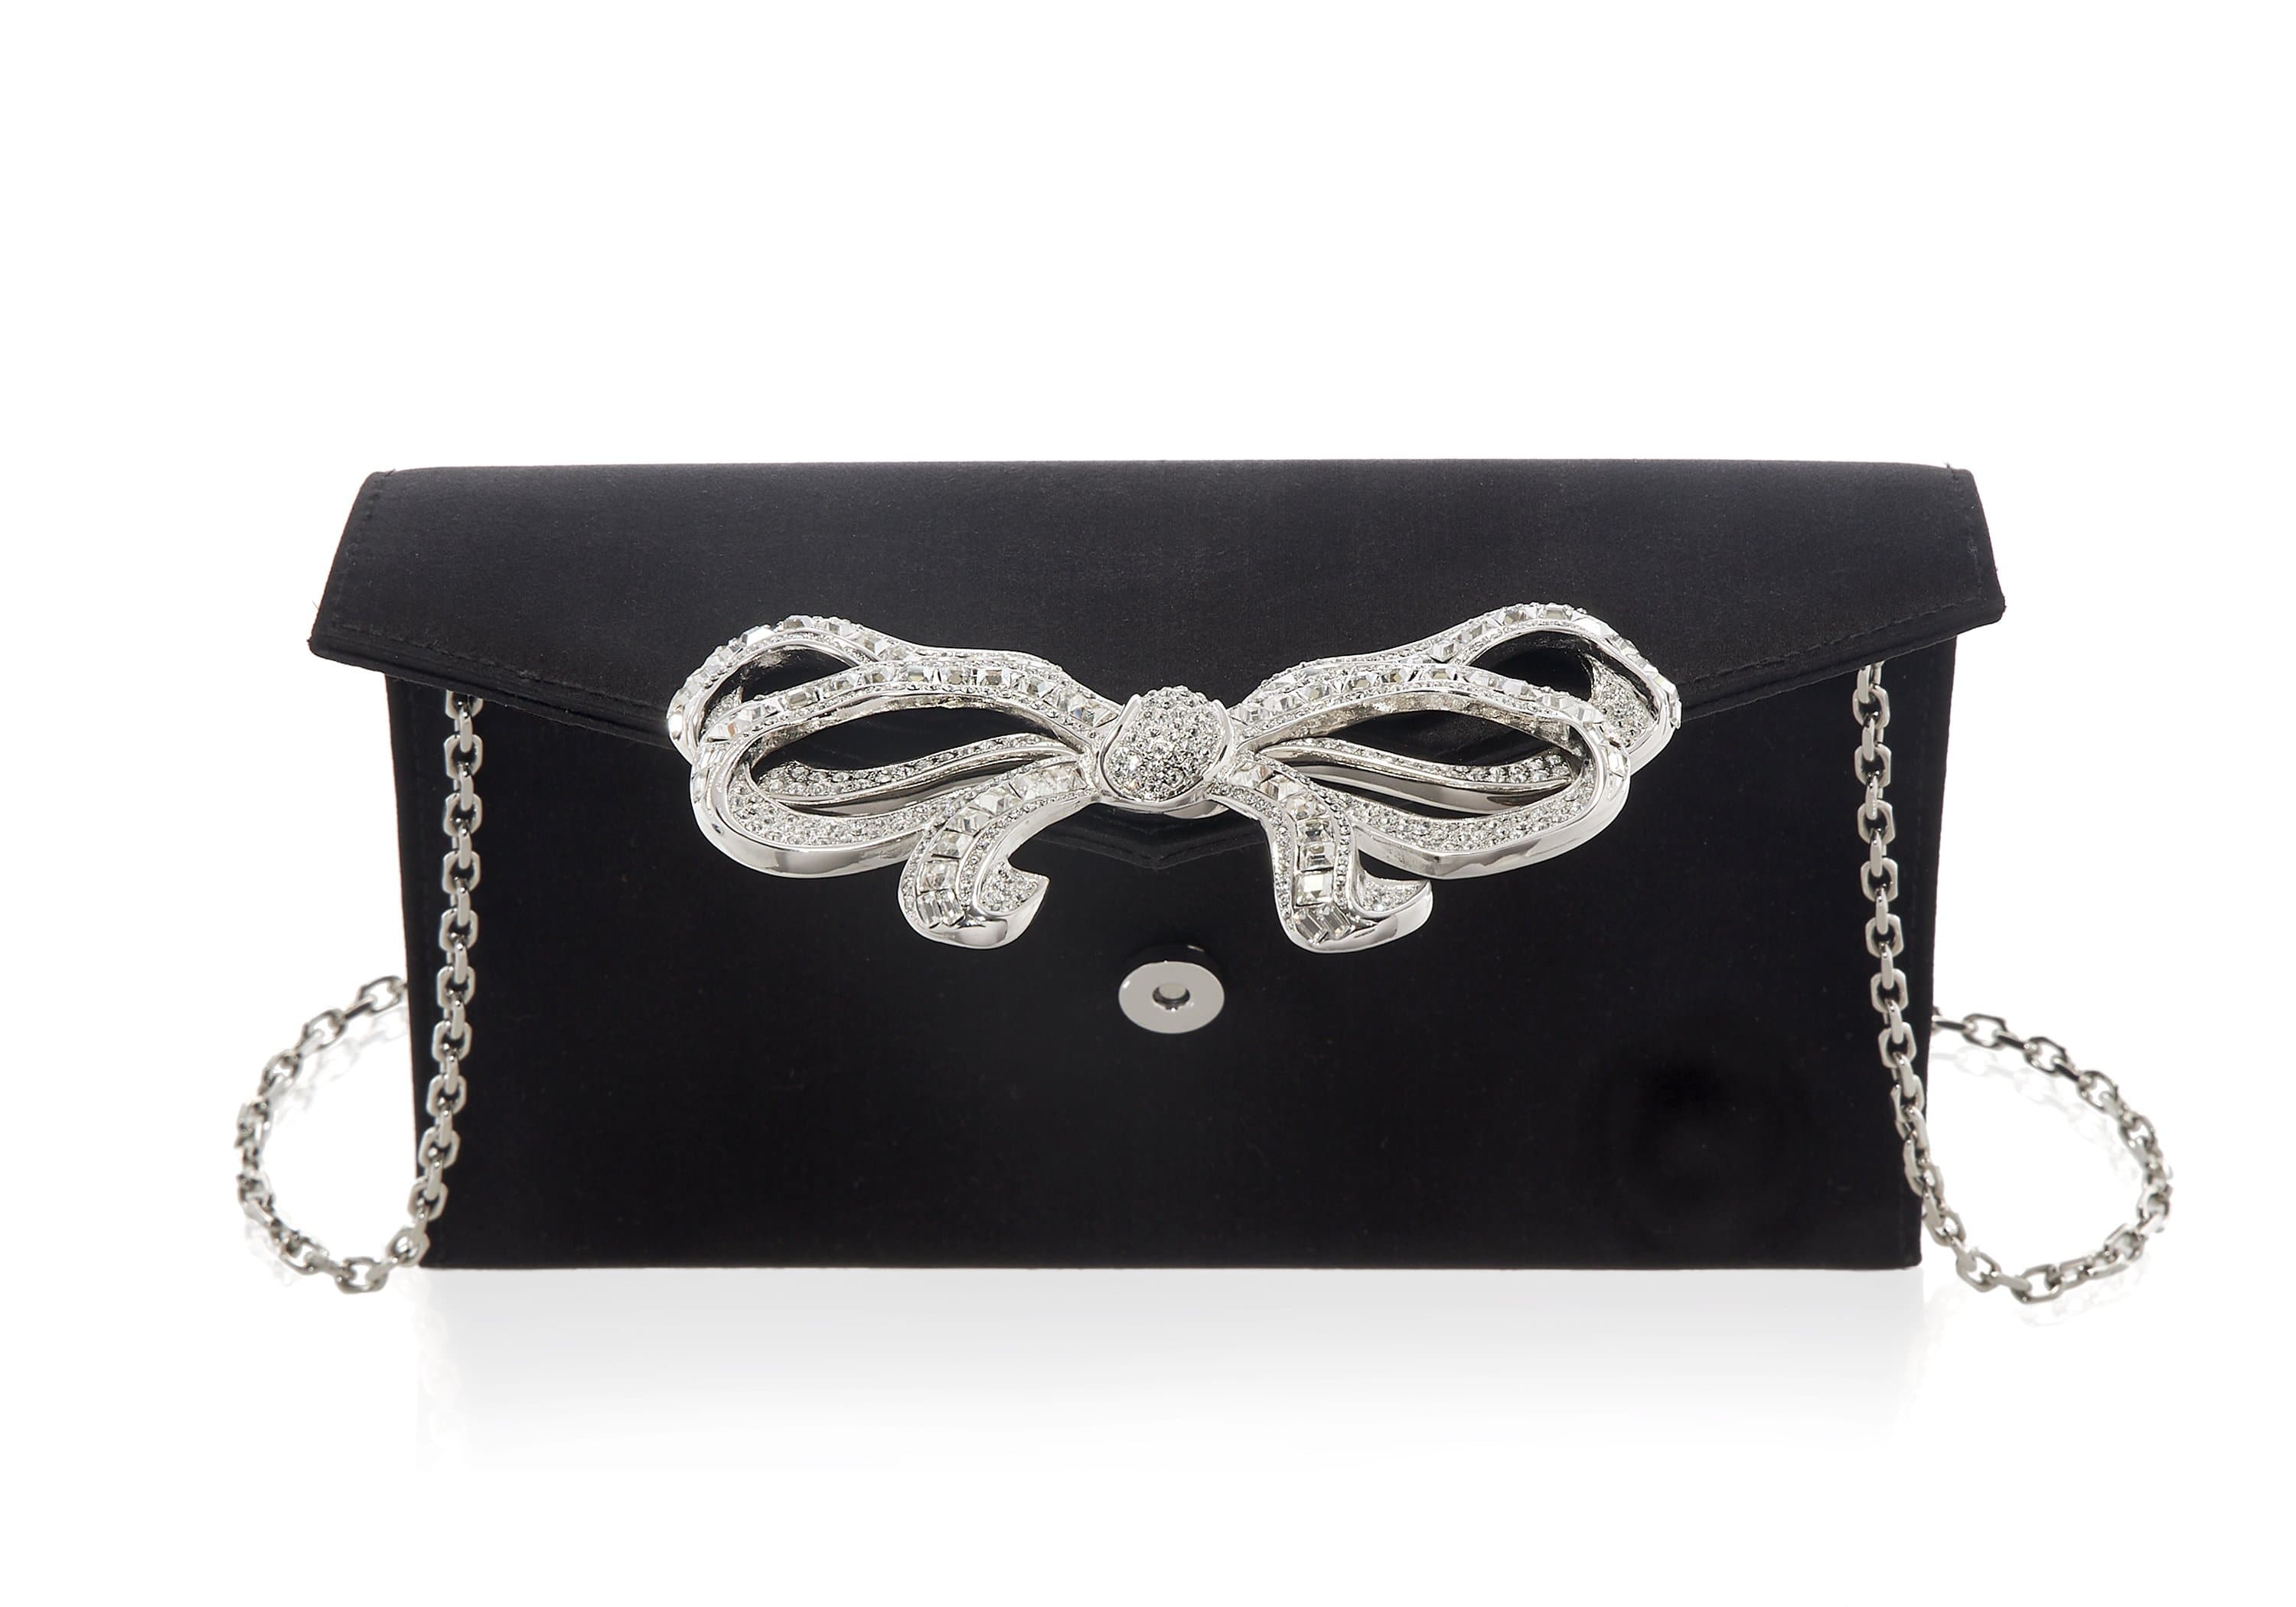 Judith Leiber Couture Women's Crystal Bow Clutch